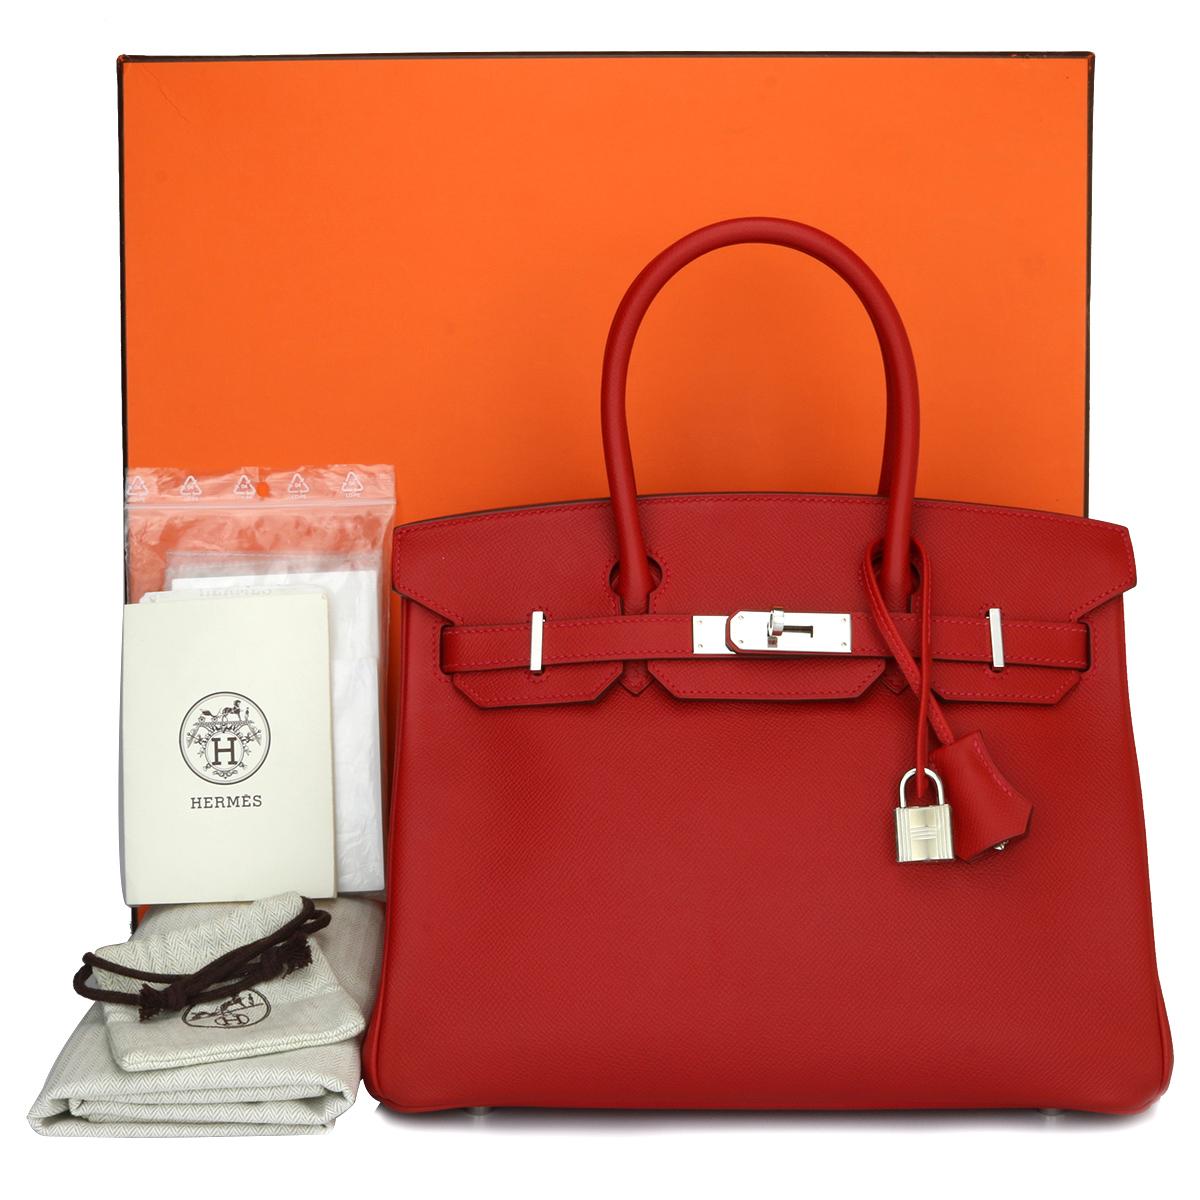 Authentic Hermès Birkin 30cm Q5 Rouge Casaque Epsom Leather with Palladium Hardware Stamp Q 2013.

This bag is still in a pristine condition. The leather still smells fresh as when new, along with it still holding to the original shape. The hardware